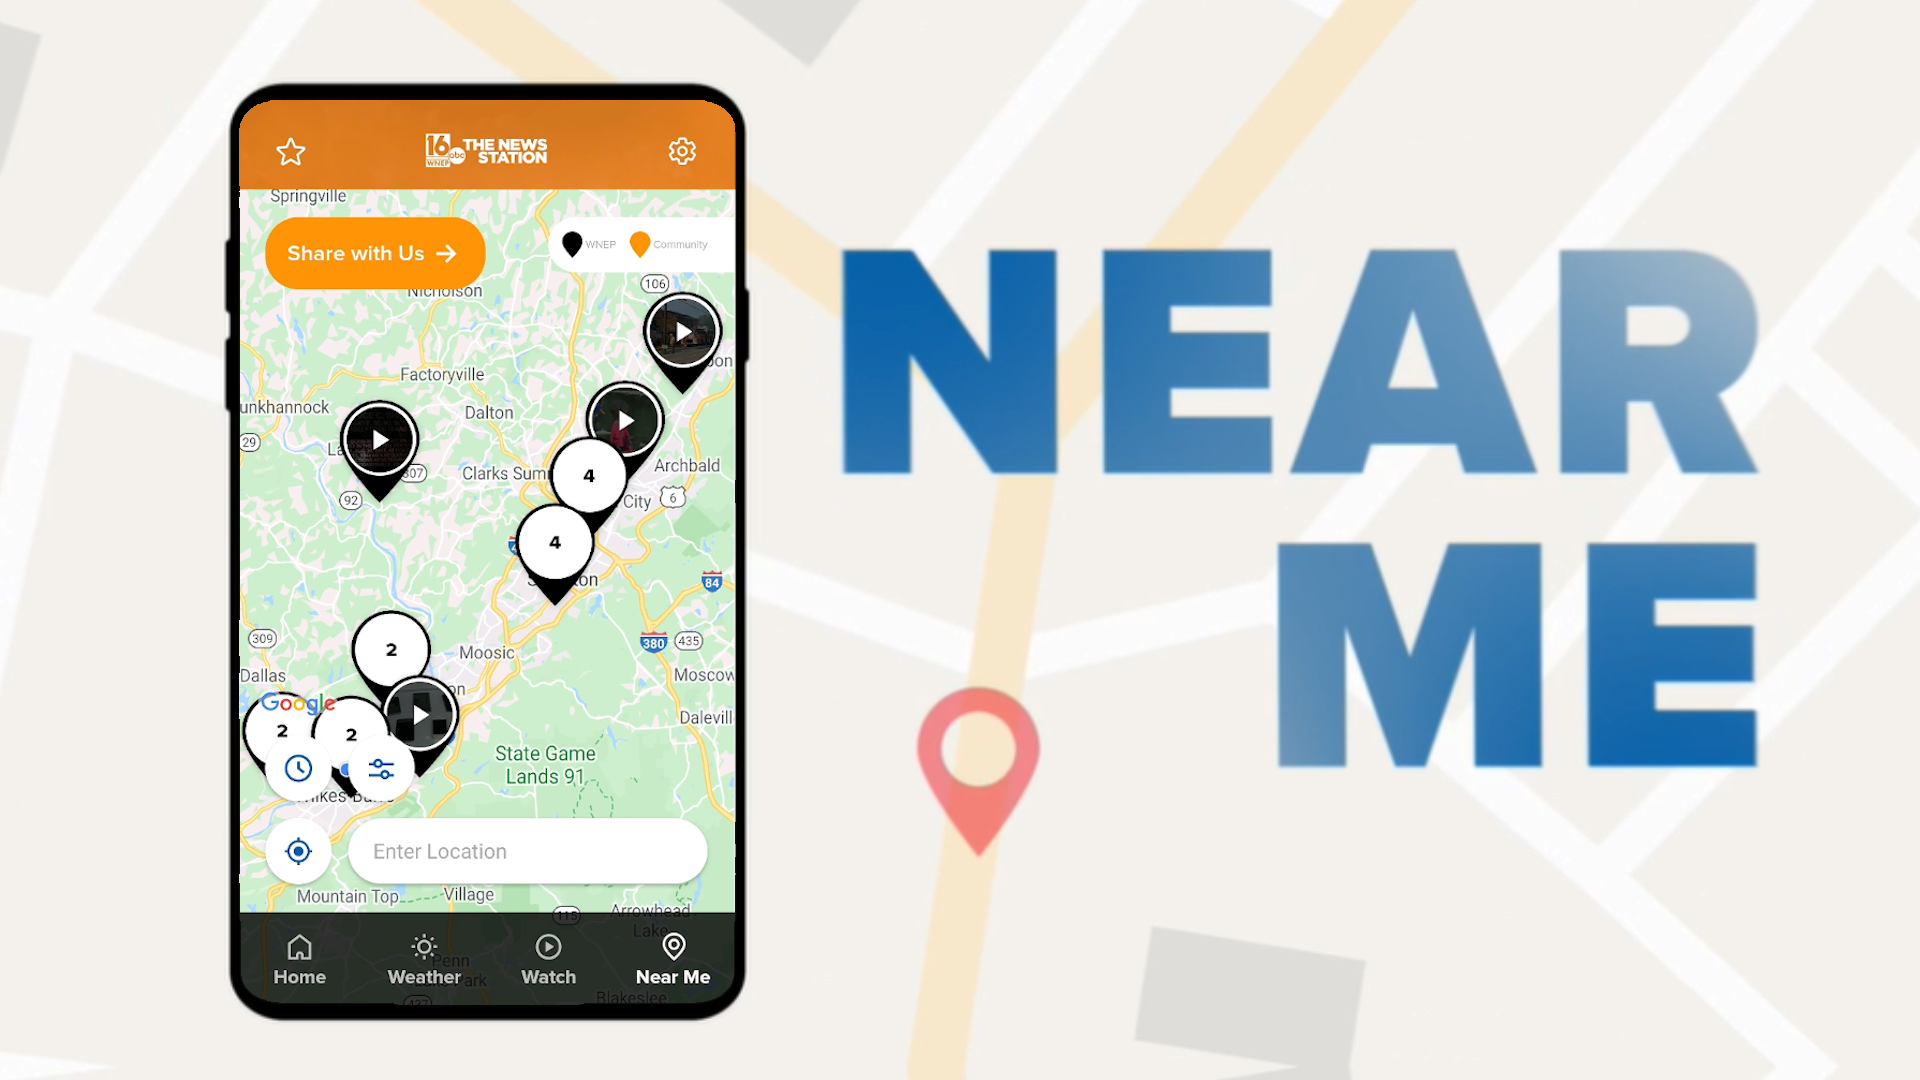 You can now share photos and videos of news spotted in your neighborhood right in the WNEP app, through a new feature called "Near Me."